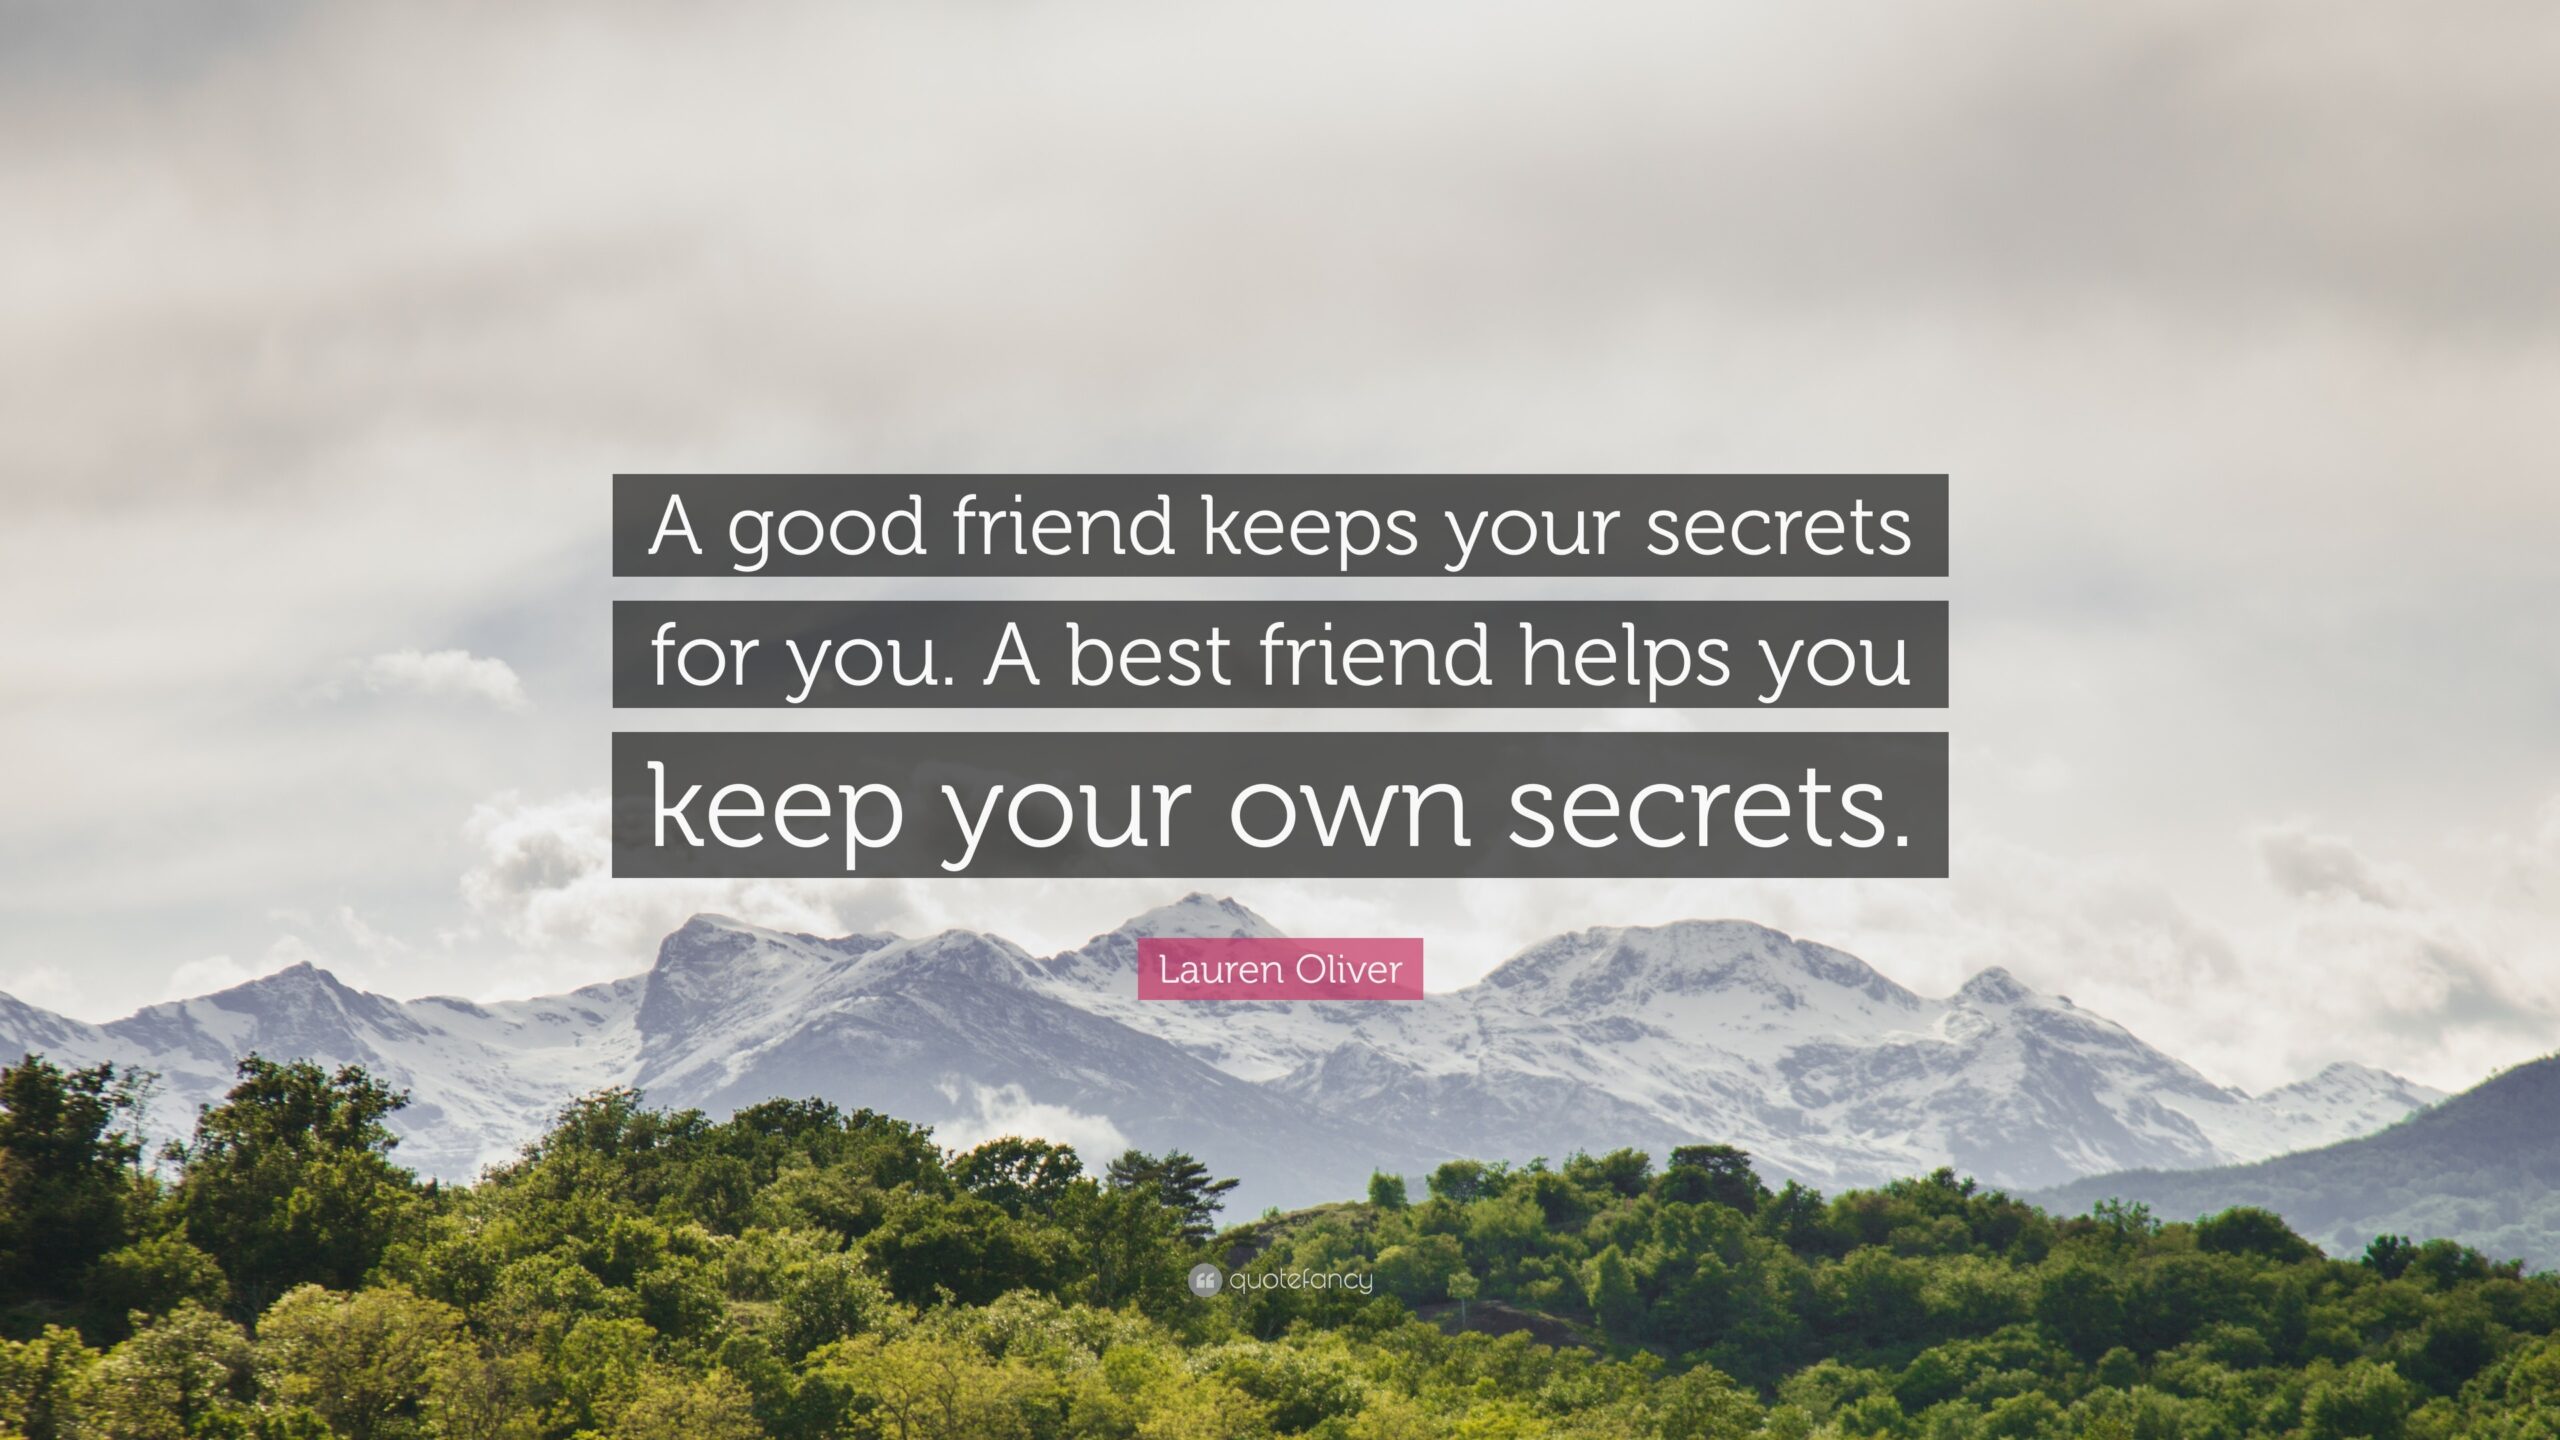 Quotes About Secrets And Friends A Good Friend Keeps